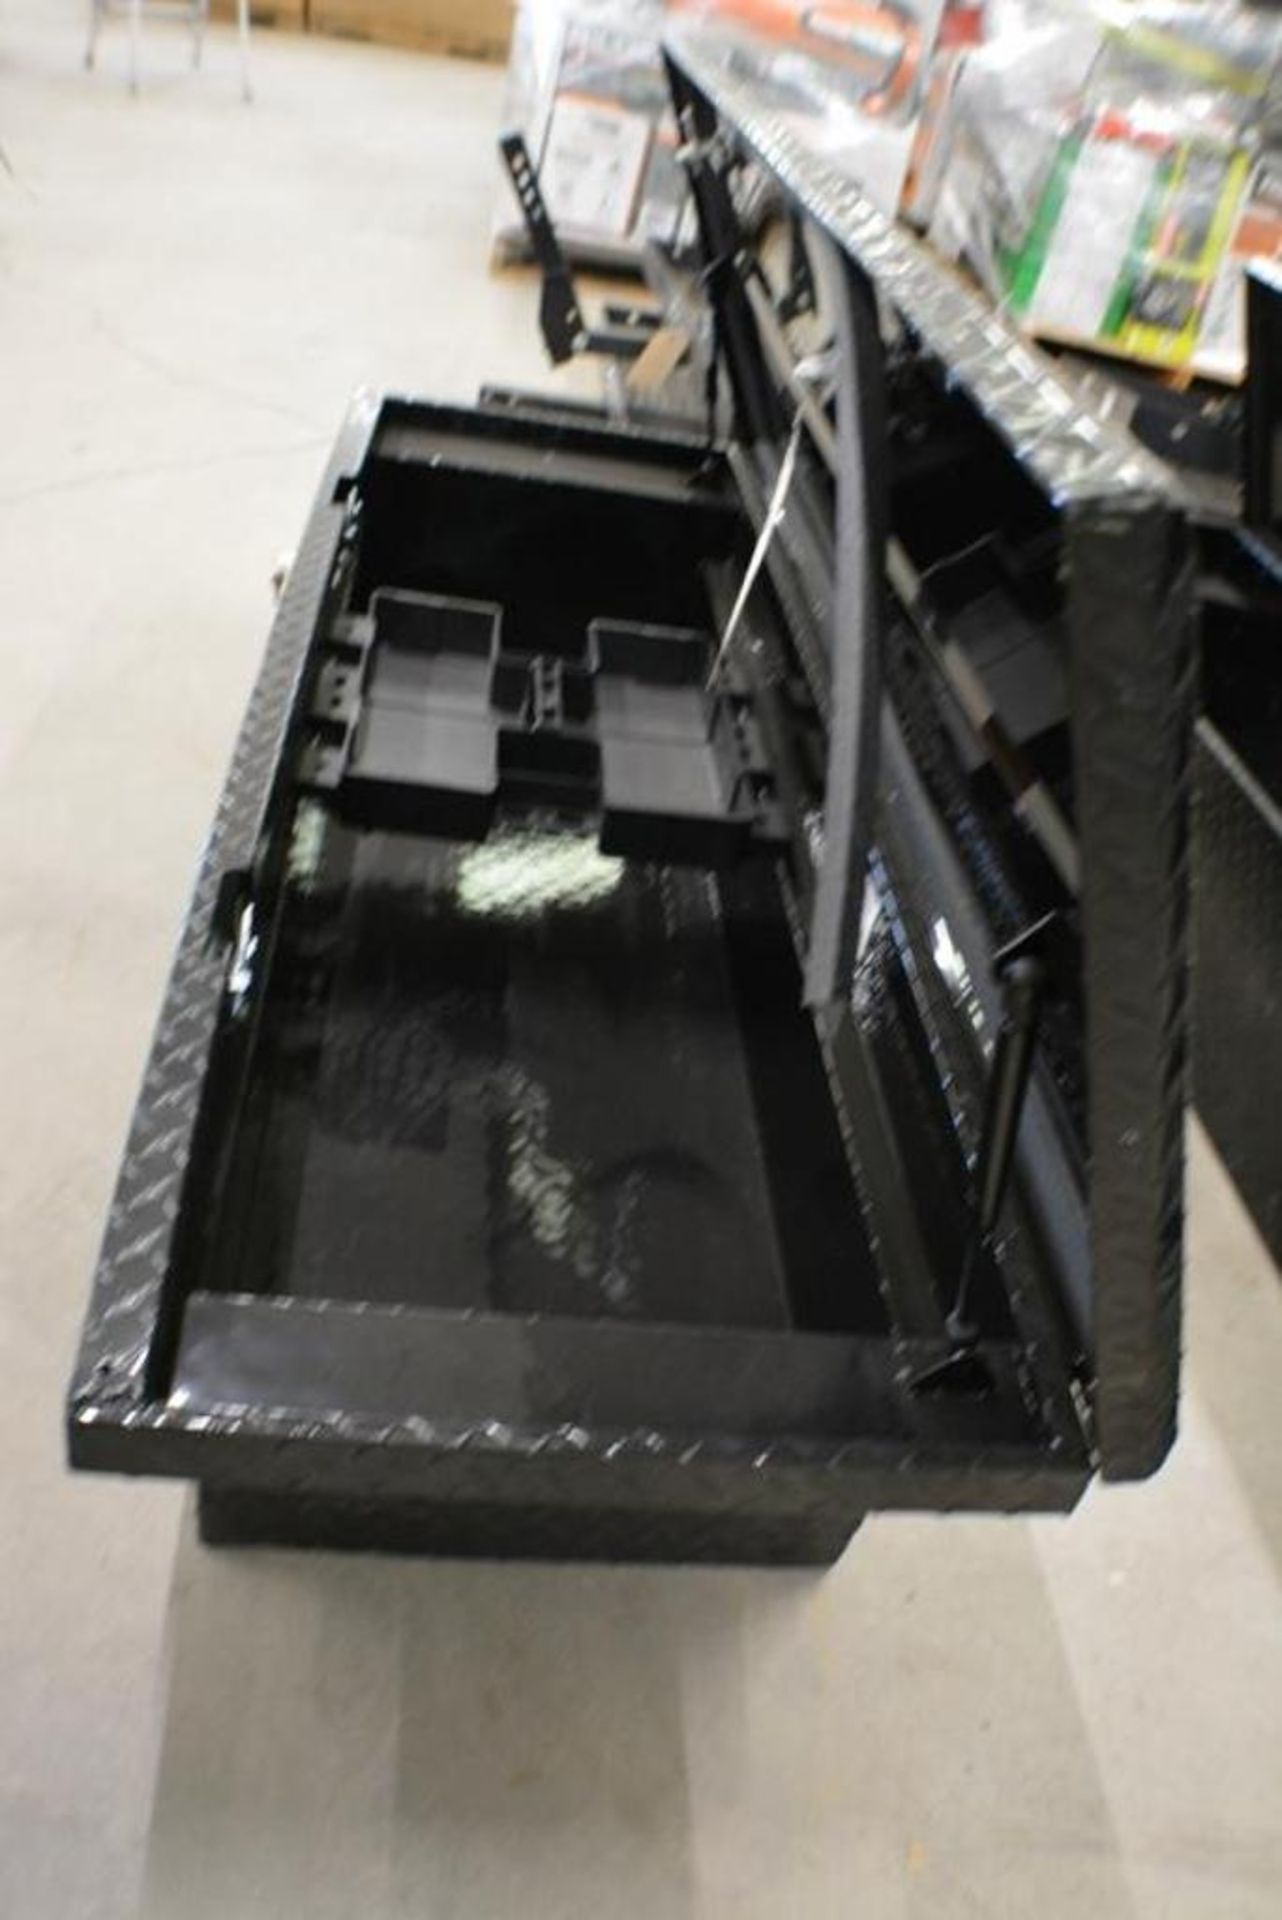 Aluminum tool box 7ft full size. Black color with key. - Image 4 of 5